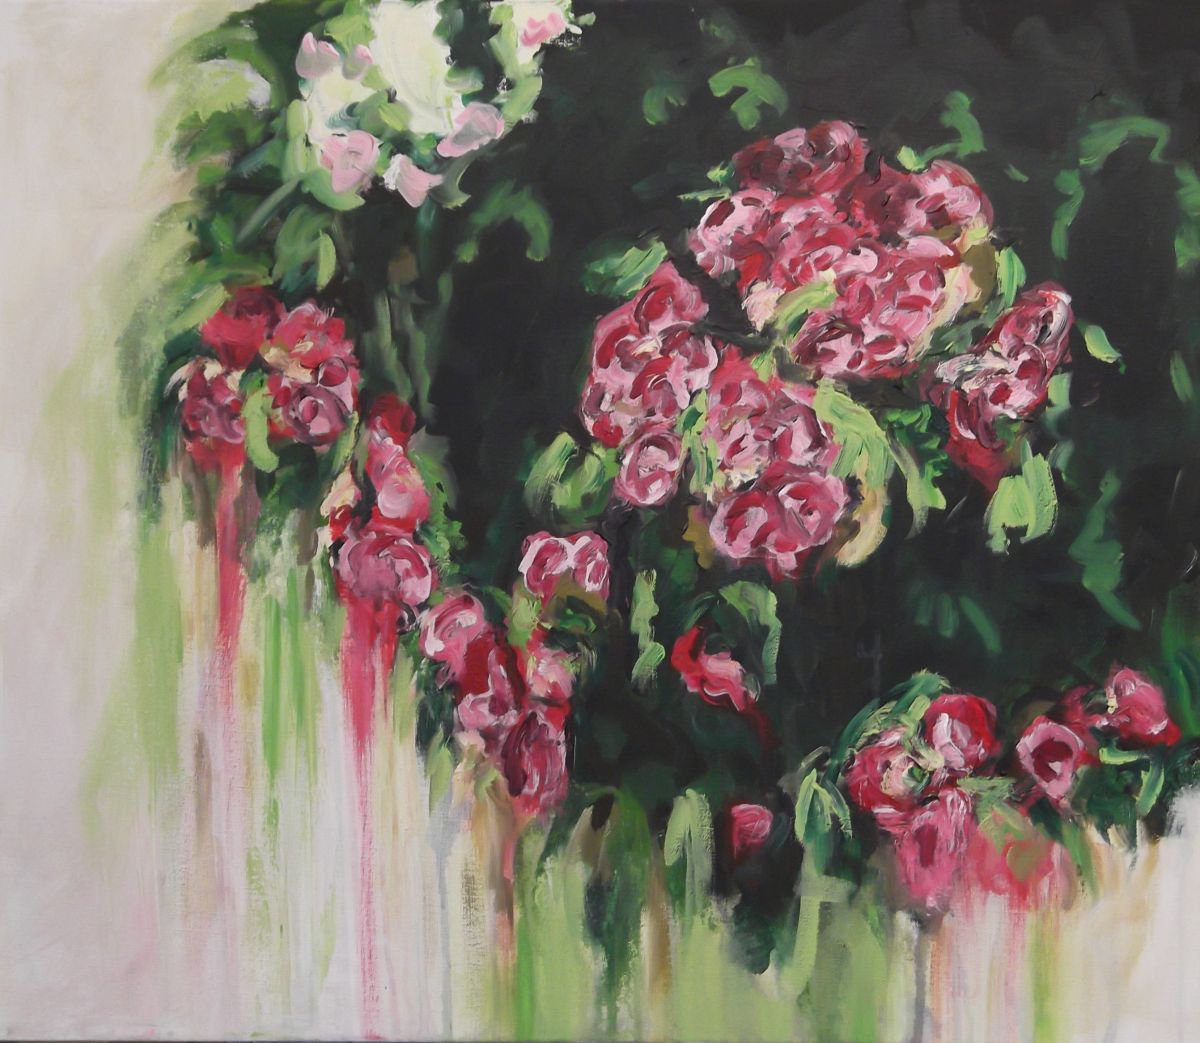 Through the garden - Roses by Cecilia Virlombier